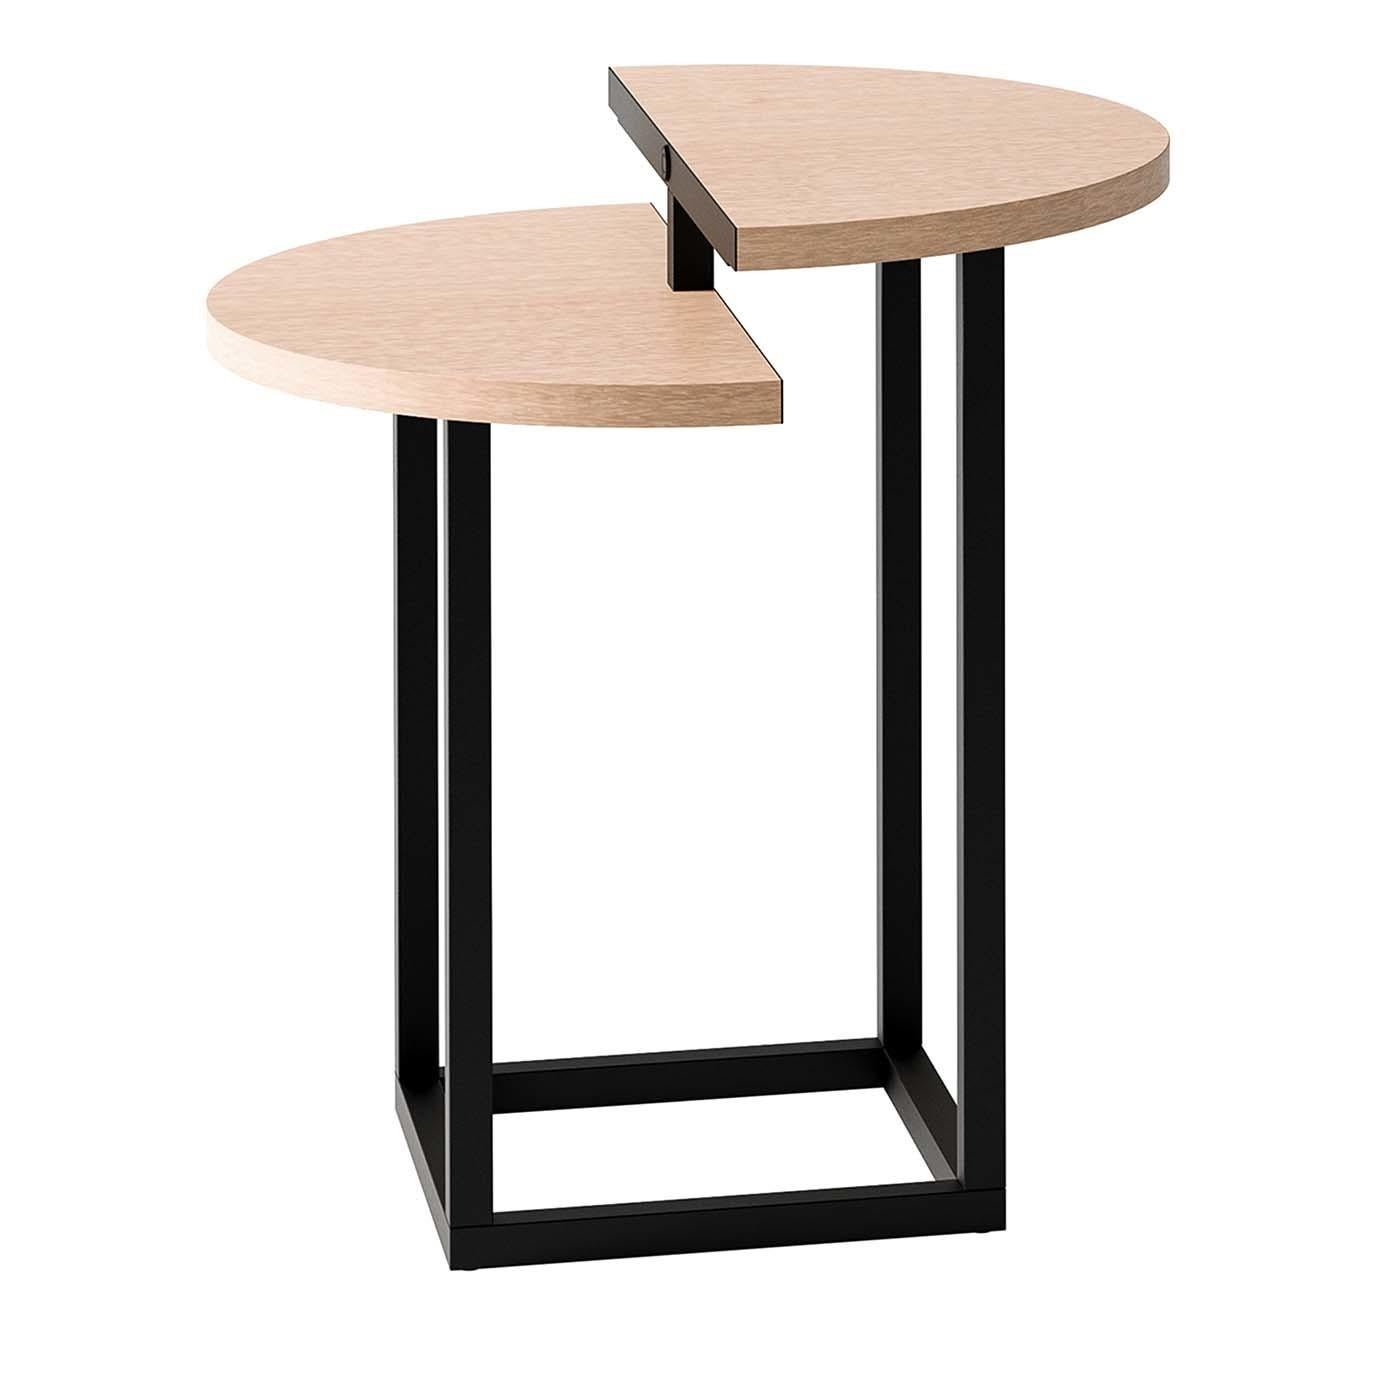 Combining refined minimalism with geometric intrigue, this side table is a versatile solution for small spaces. The split top is crafted of wood with beige eucalyptus veneer and is set at different heights atop a square metal base with a matte black